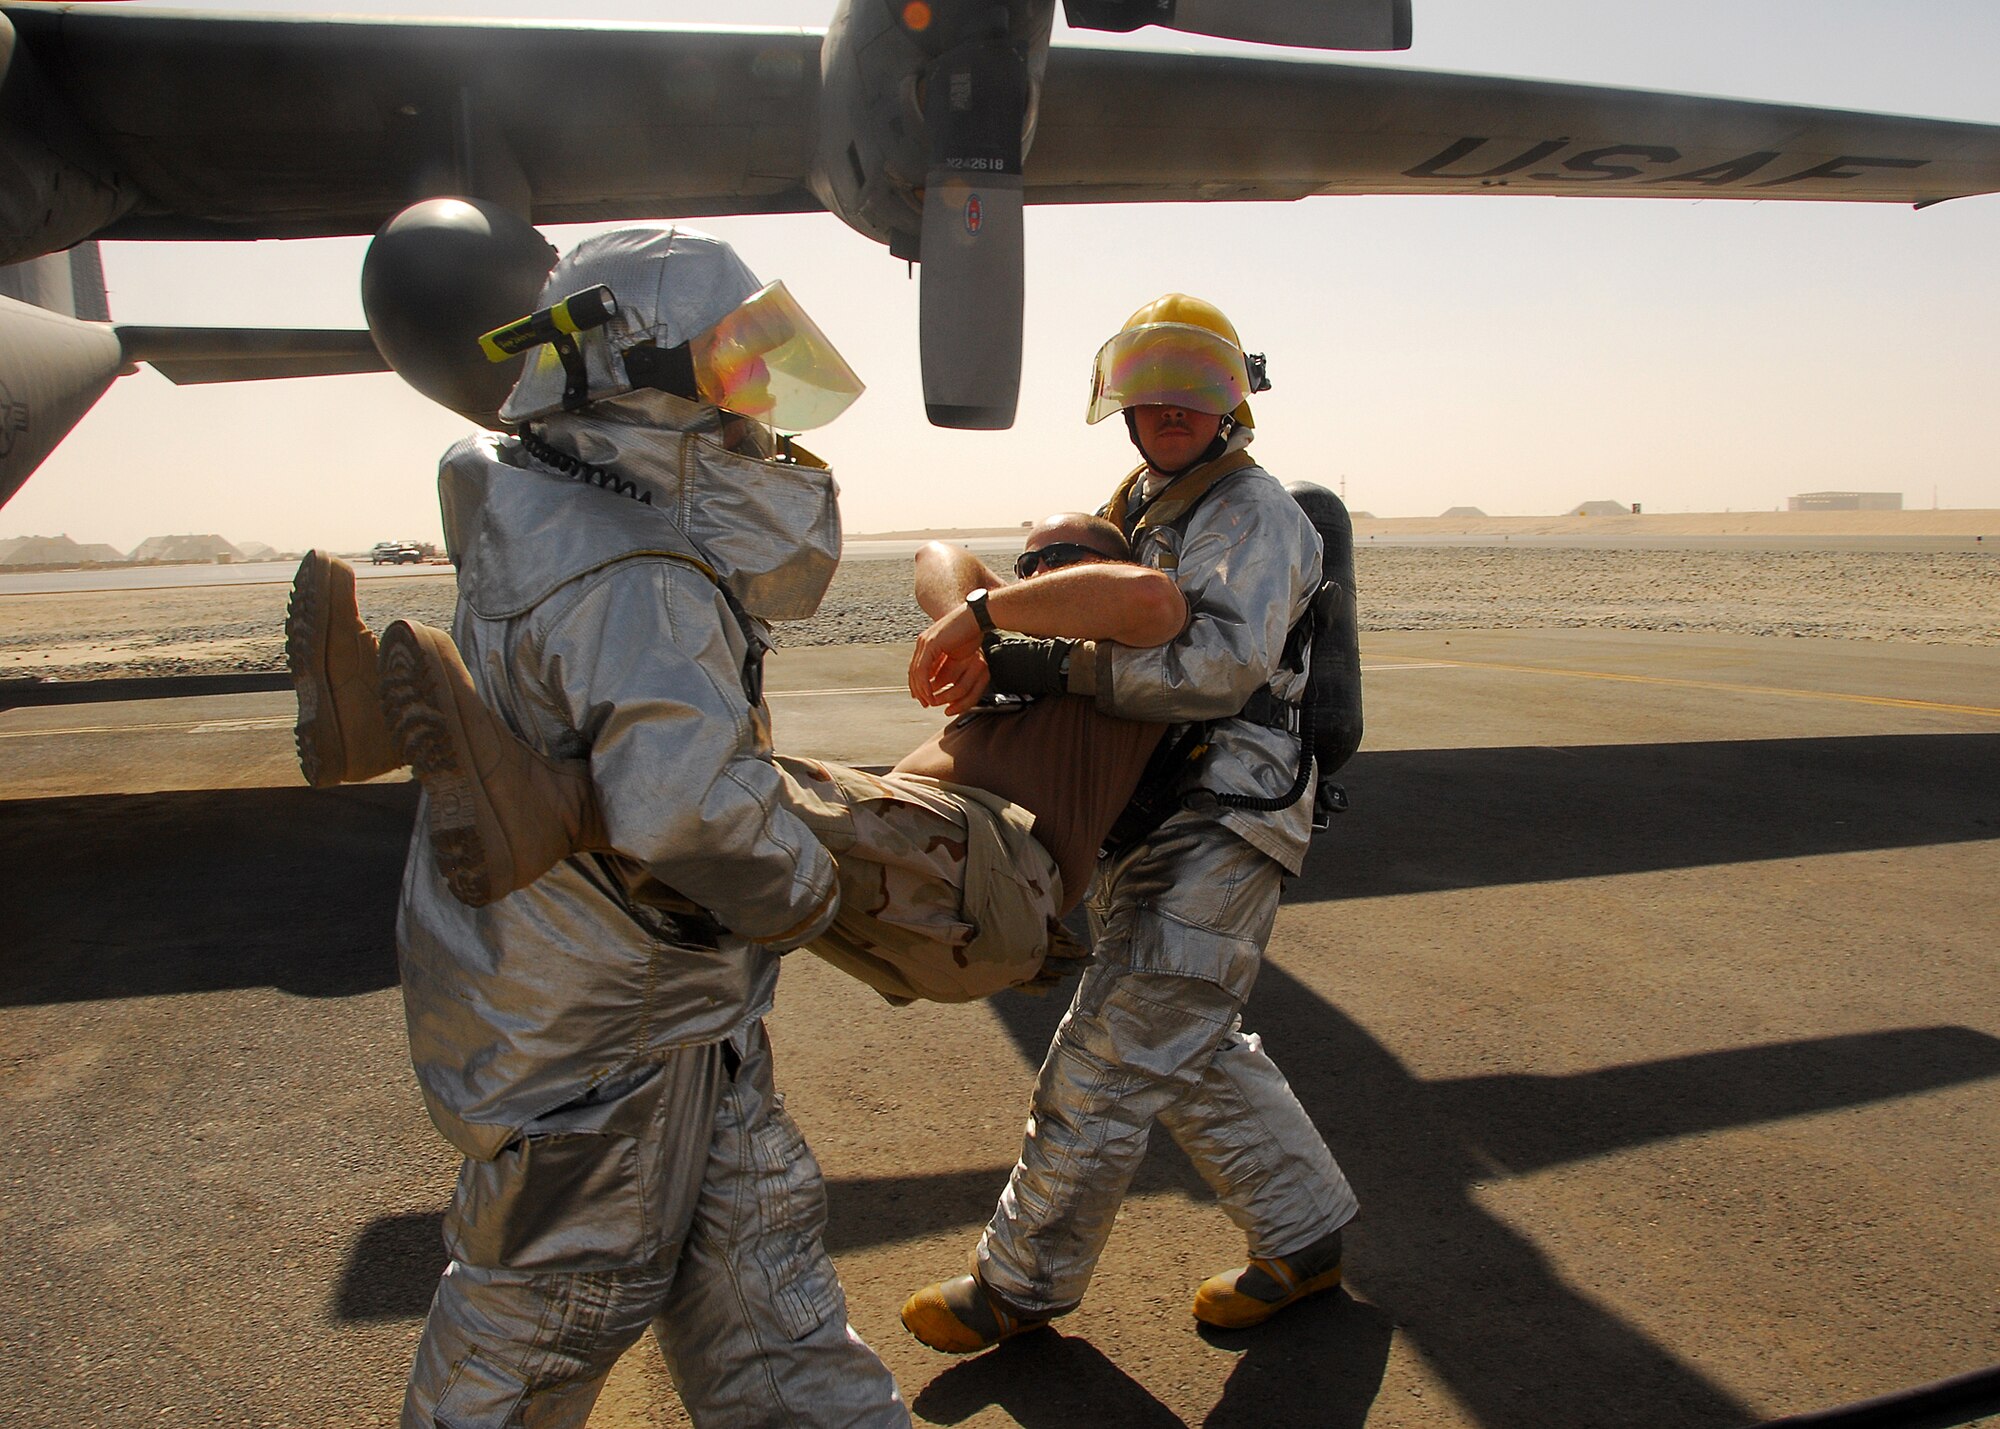 SOUTHWEST ASIA  -- Firefighters with the 386th Expeditionary Civil Engineer Squadron fire department remove a simulated fire victim from a C-130 Hercules in search of a simulated fire victim during an aircraft egress training scenario on Oct. 6 at an air base in Southwest Asia. The 386th ECES fire department conducts day and night training on various airframes and structures up to four times a month. (U.S. Air Force photo/Staff Sgt. Vincent Borden)